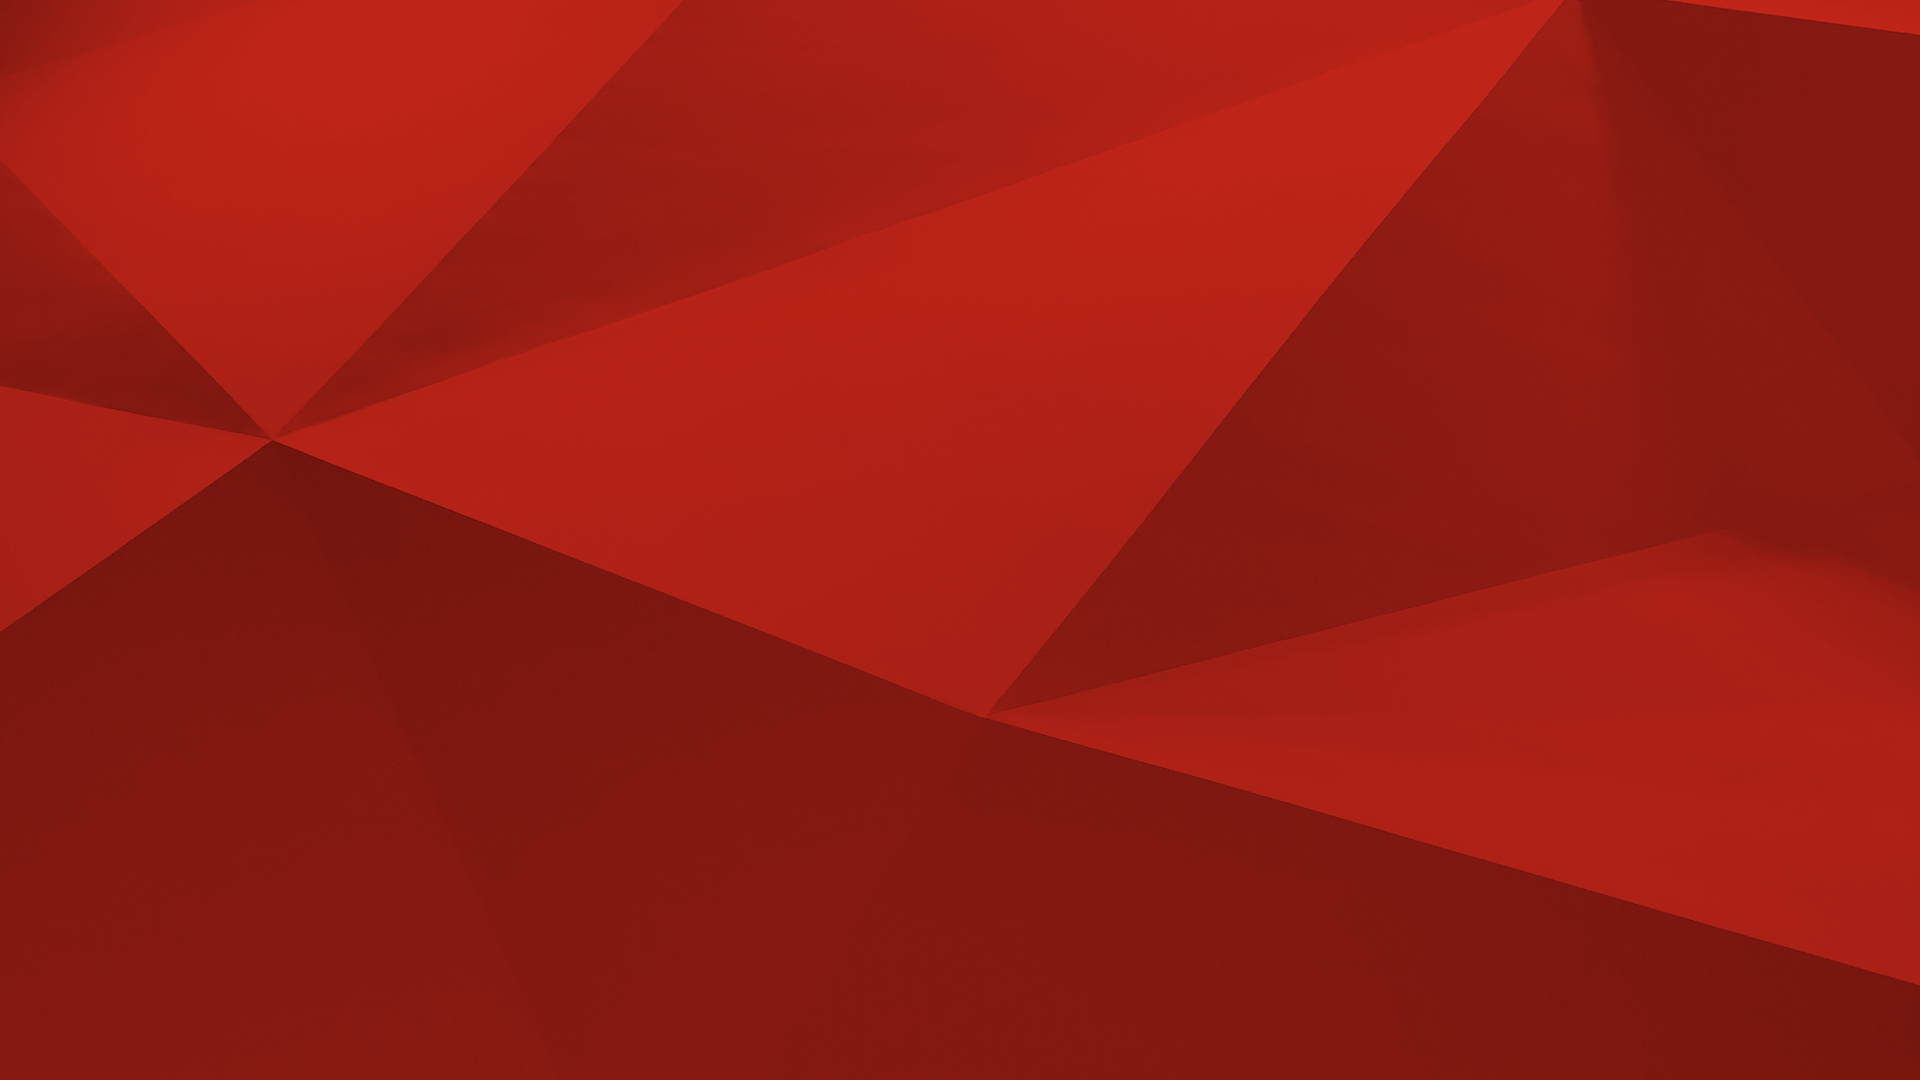 Generic banner graphic with different shades of red